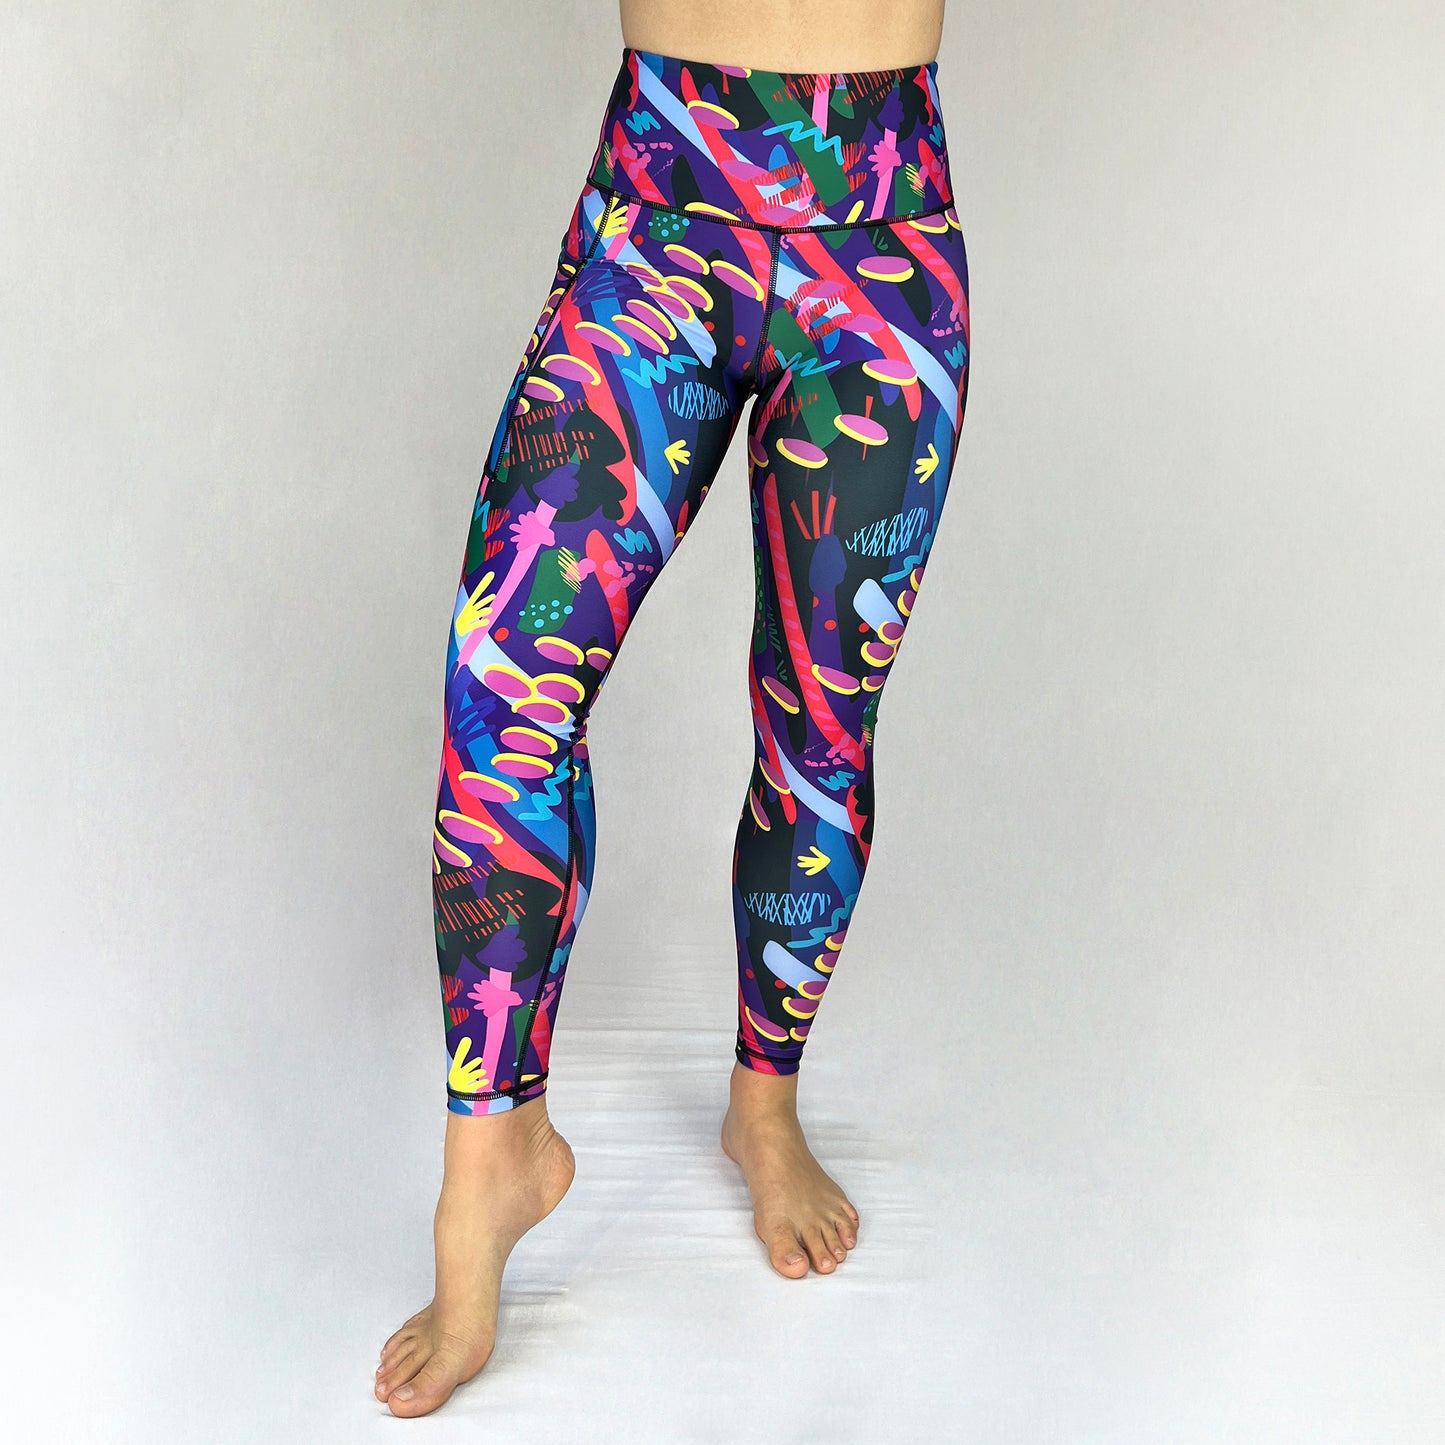 Olympia 2022 Ltd full length leggings with pocket by Art2Go Monique Baques front